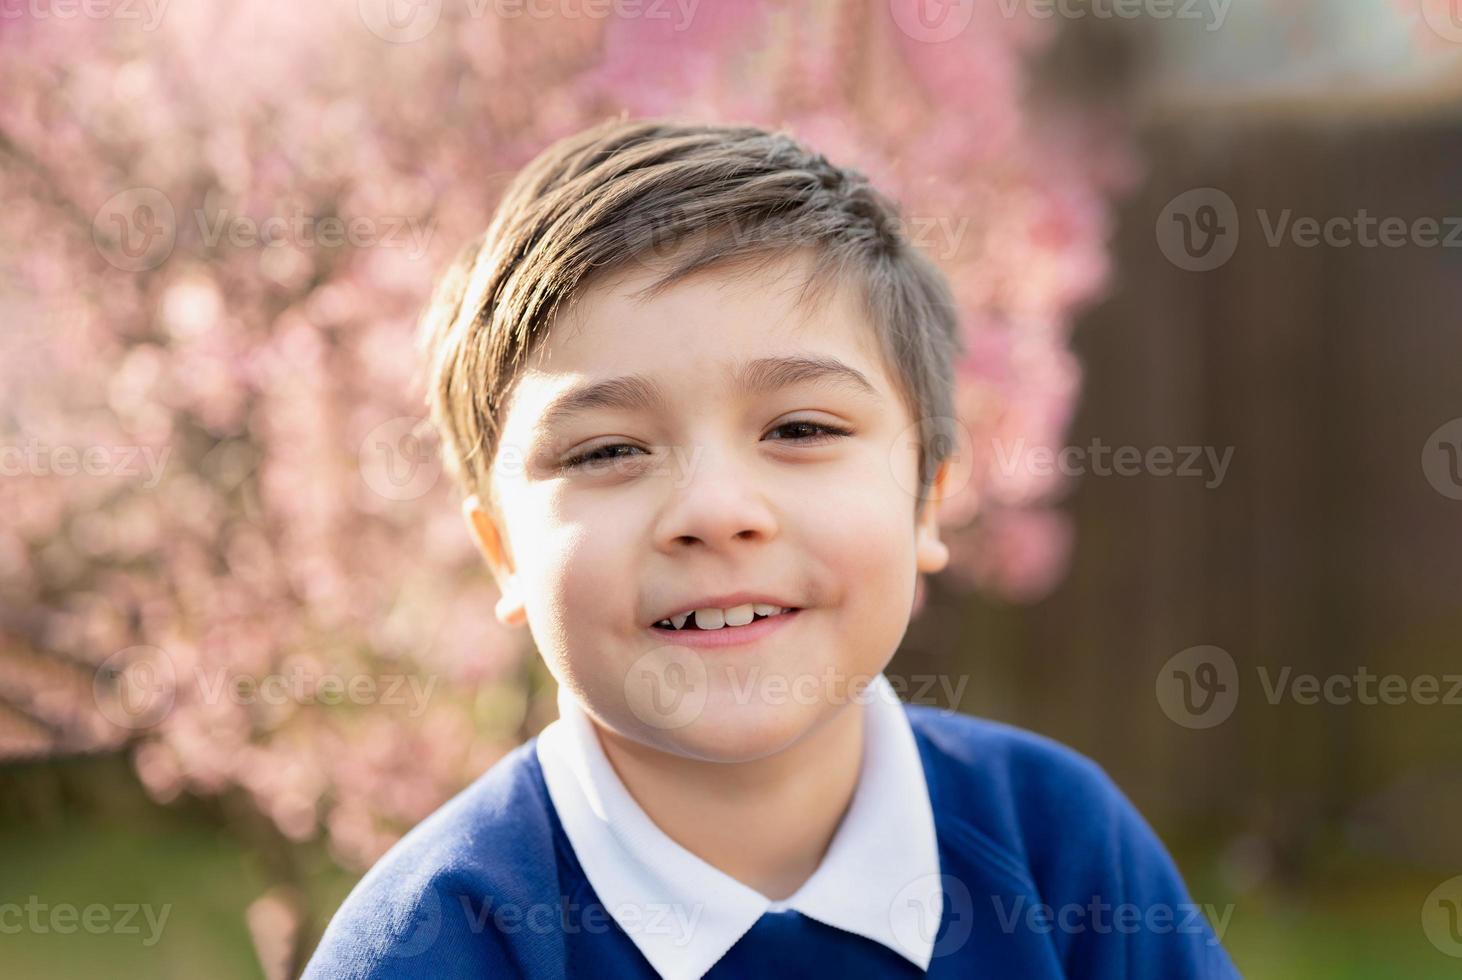 Portrait happy young boy looking at camera with smiling face, School kid standing in the front garden waiting for school bus in the morning photo